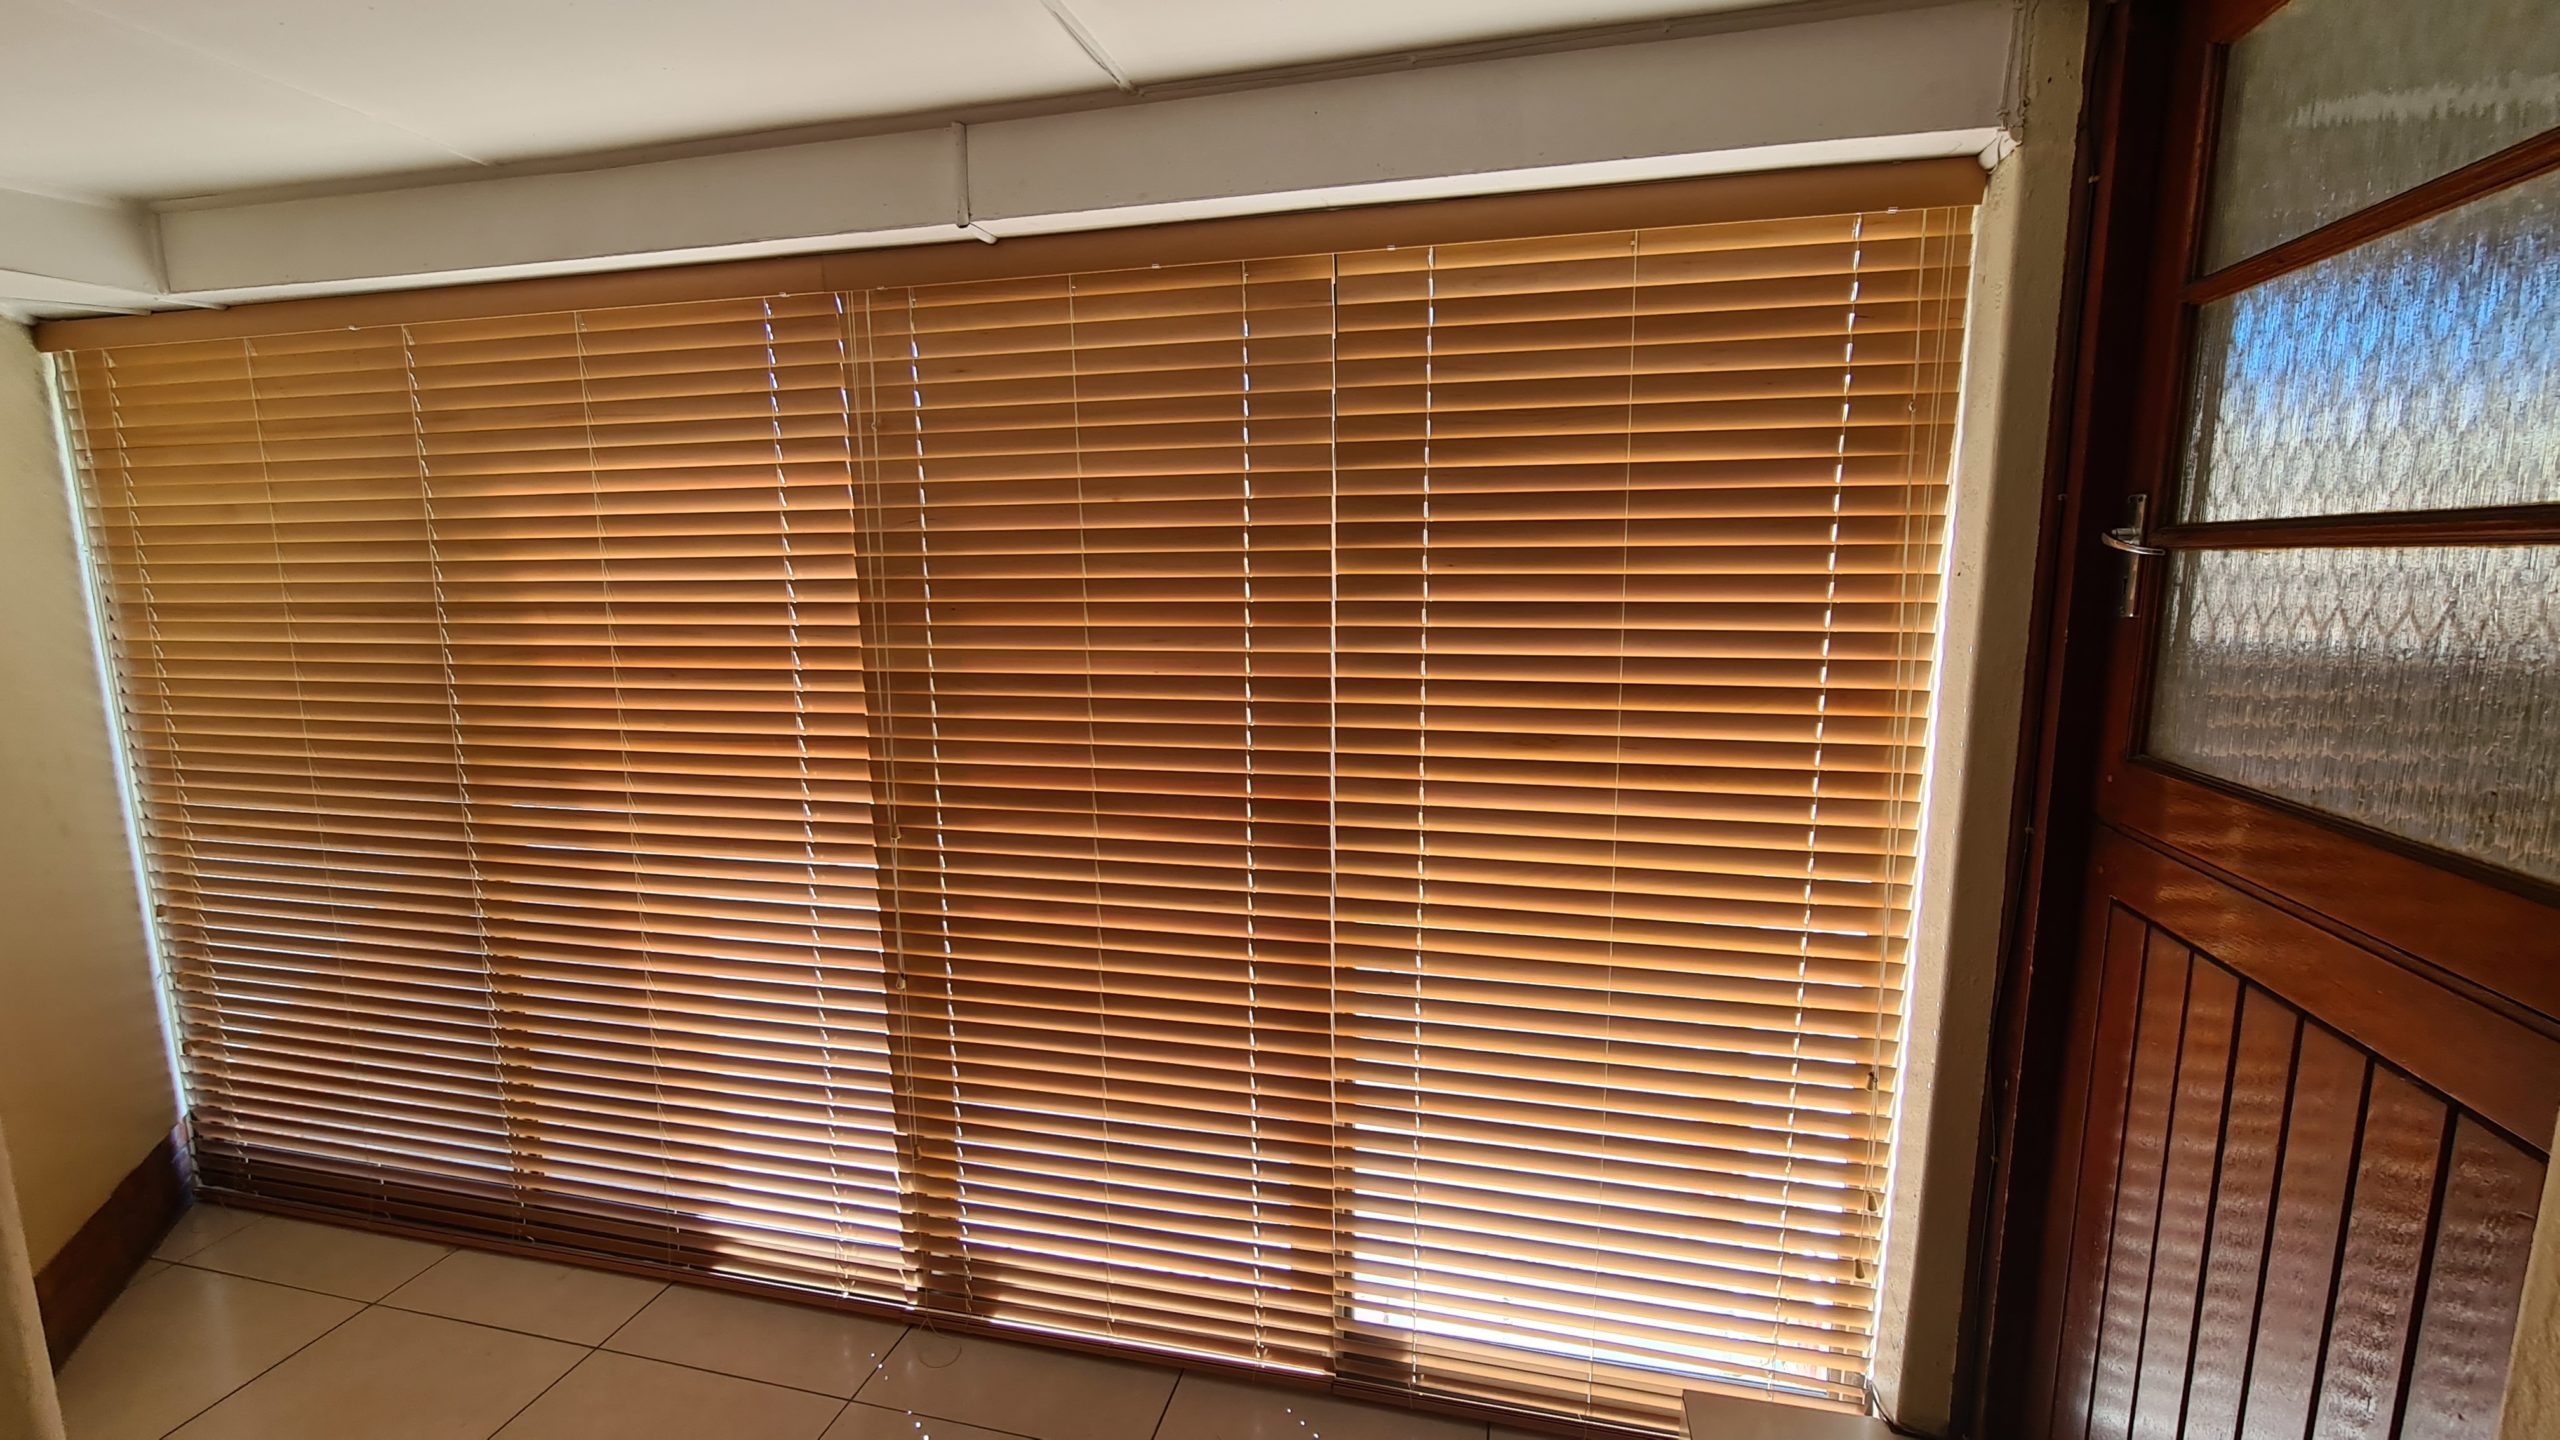 Bespoke Designs - 20211025 094909 scaled - blinds and shutters,blinds,shutters,window treatments